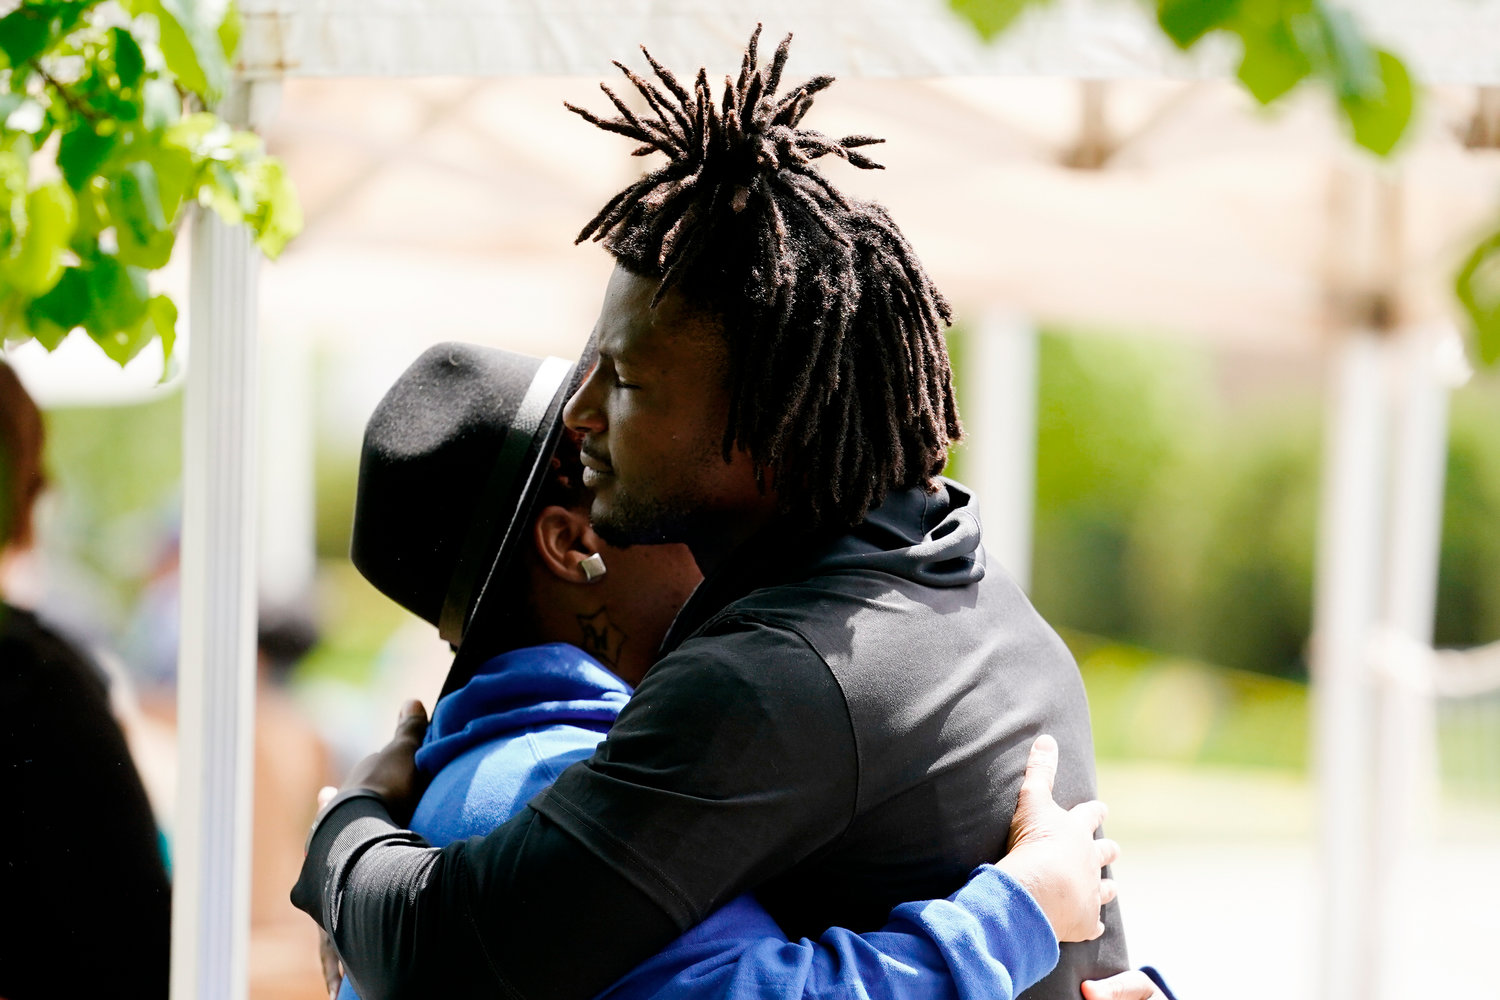 Buffalo Bills' Josh Thomas, right, embraces a person as he visits the scene of Saturday's shooting at a supermarket, in Buffalo, N.Y., Wednesday, May 18, 2022. (AP Photo/Matt Rourke)